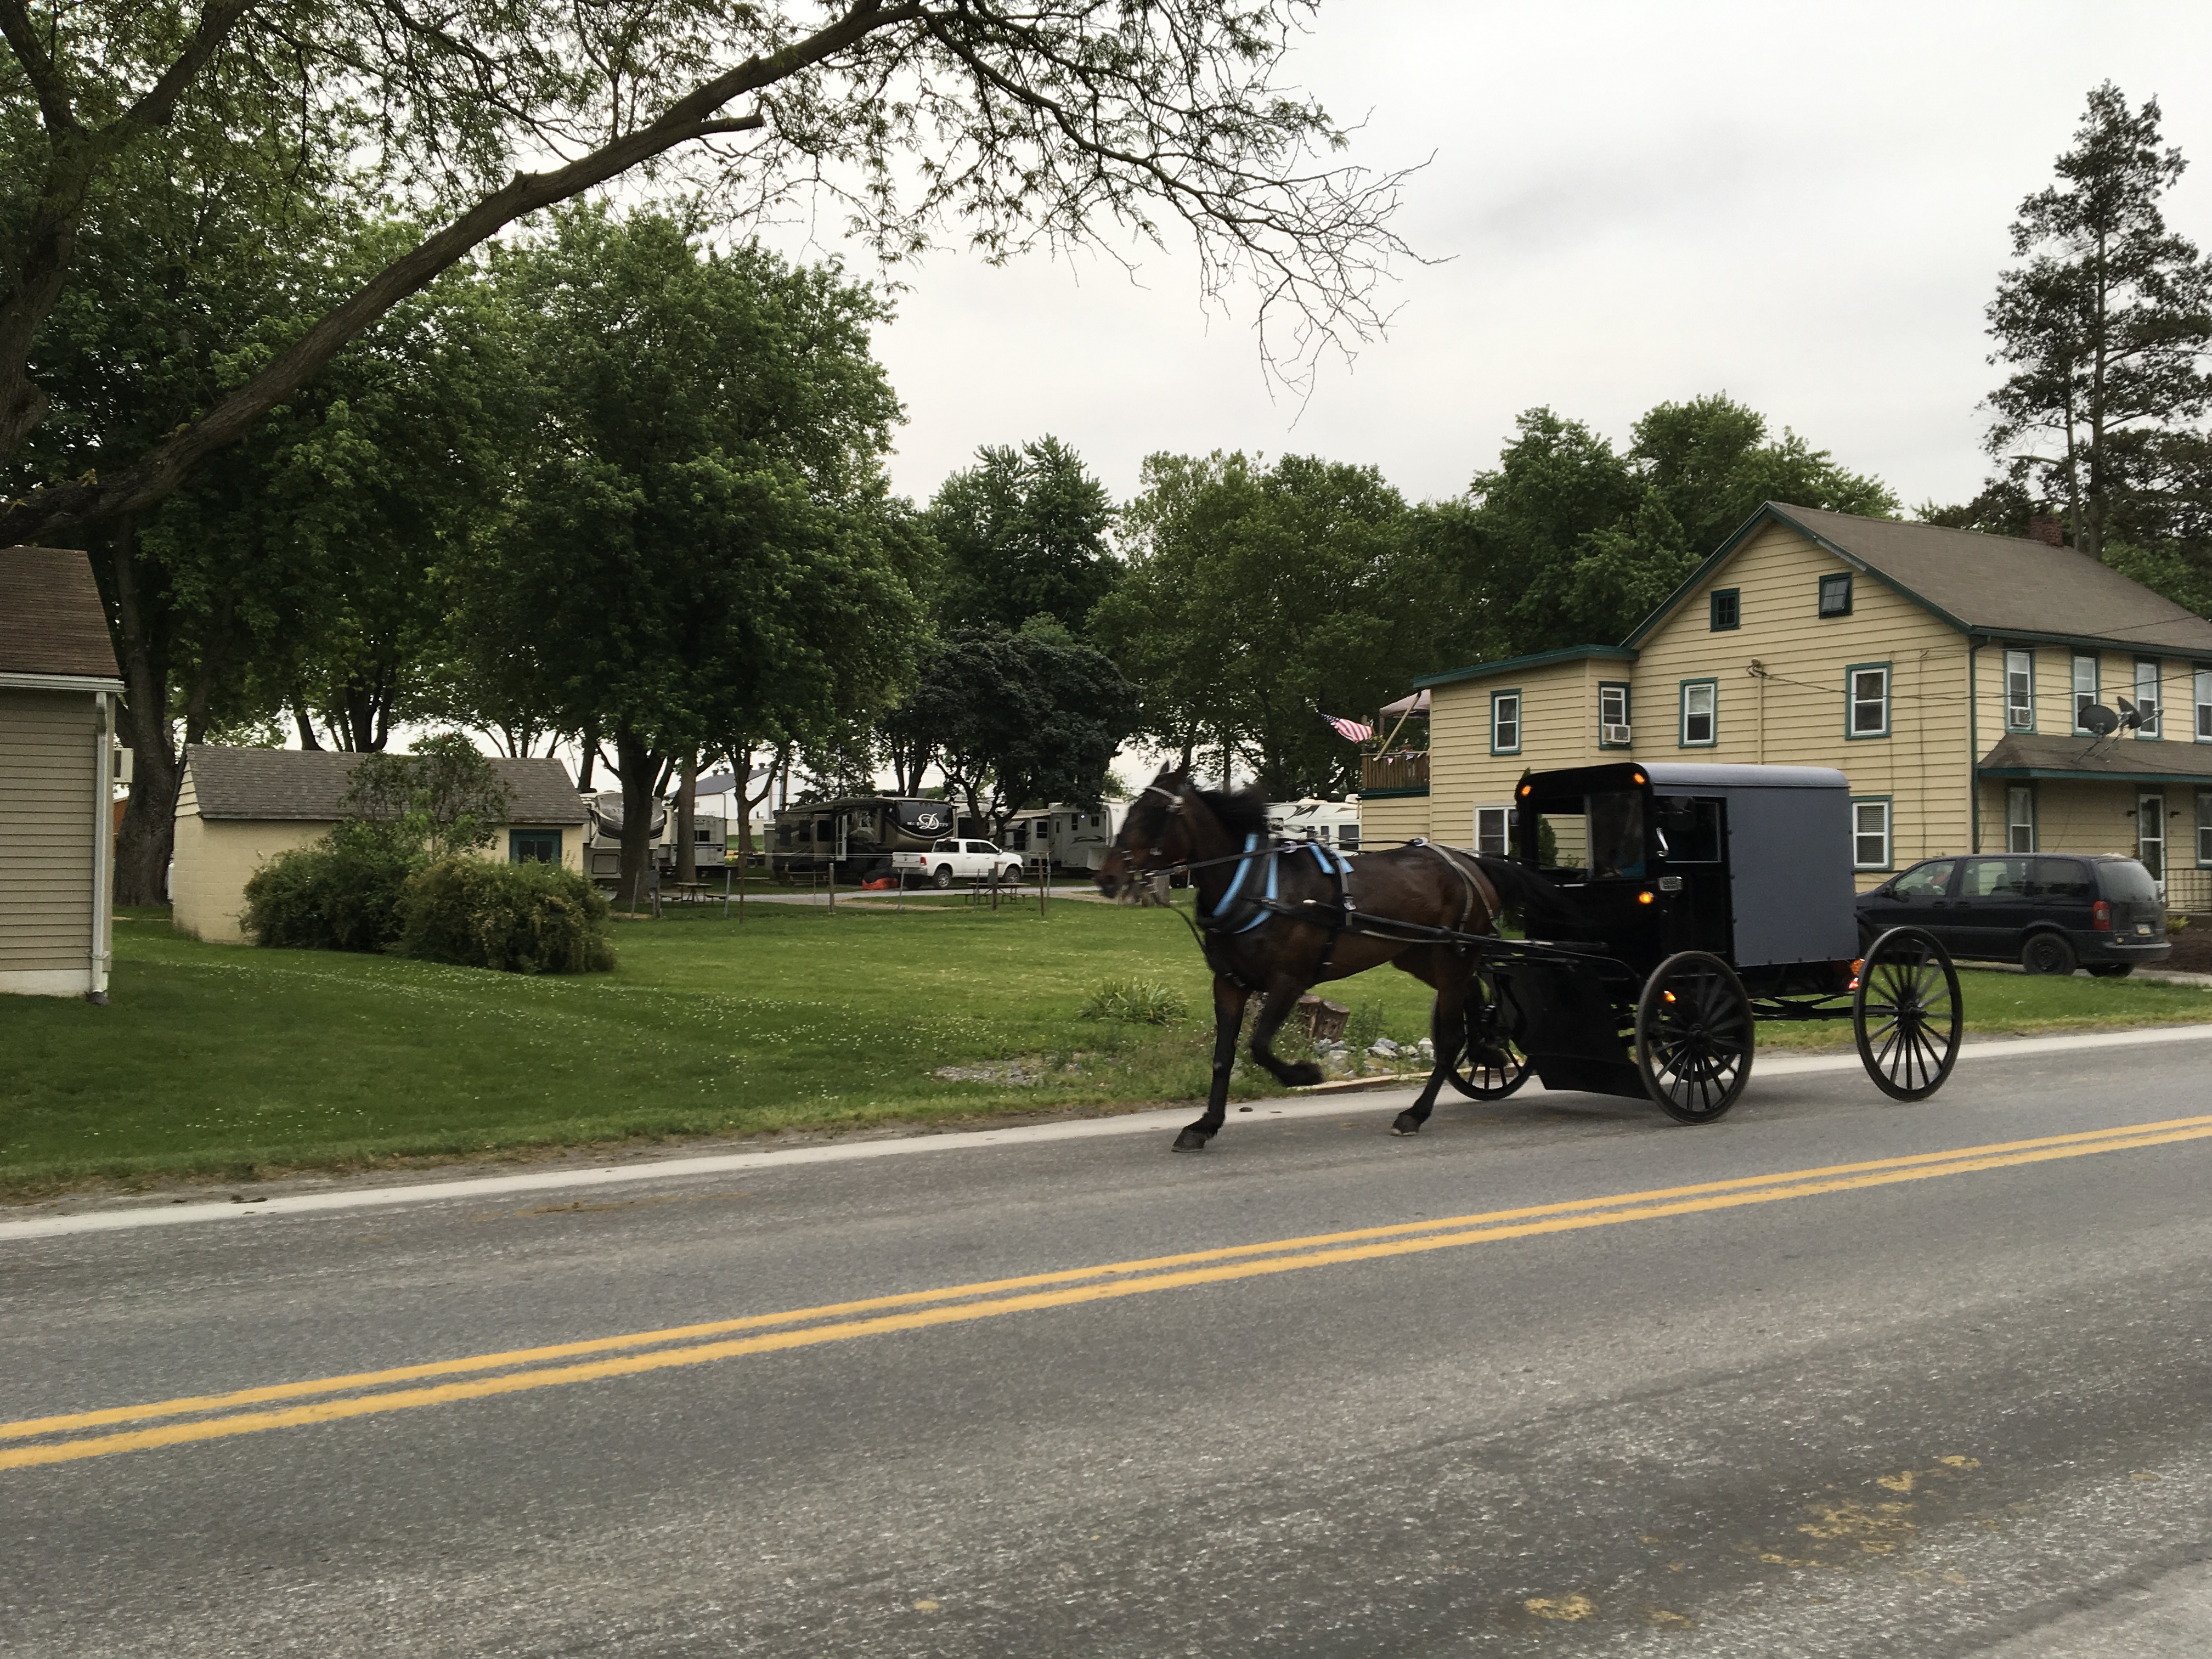 Flory's Cottages & Camping - buggy ride